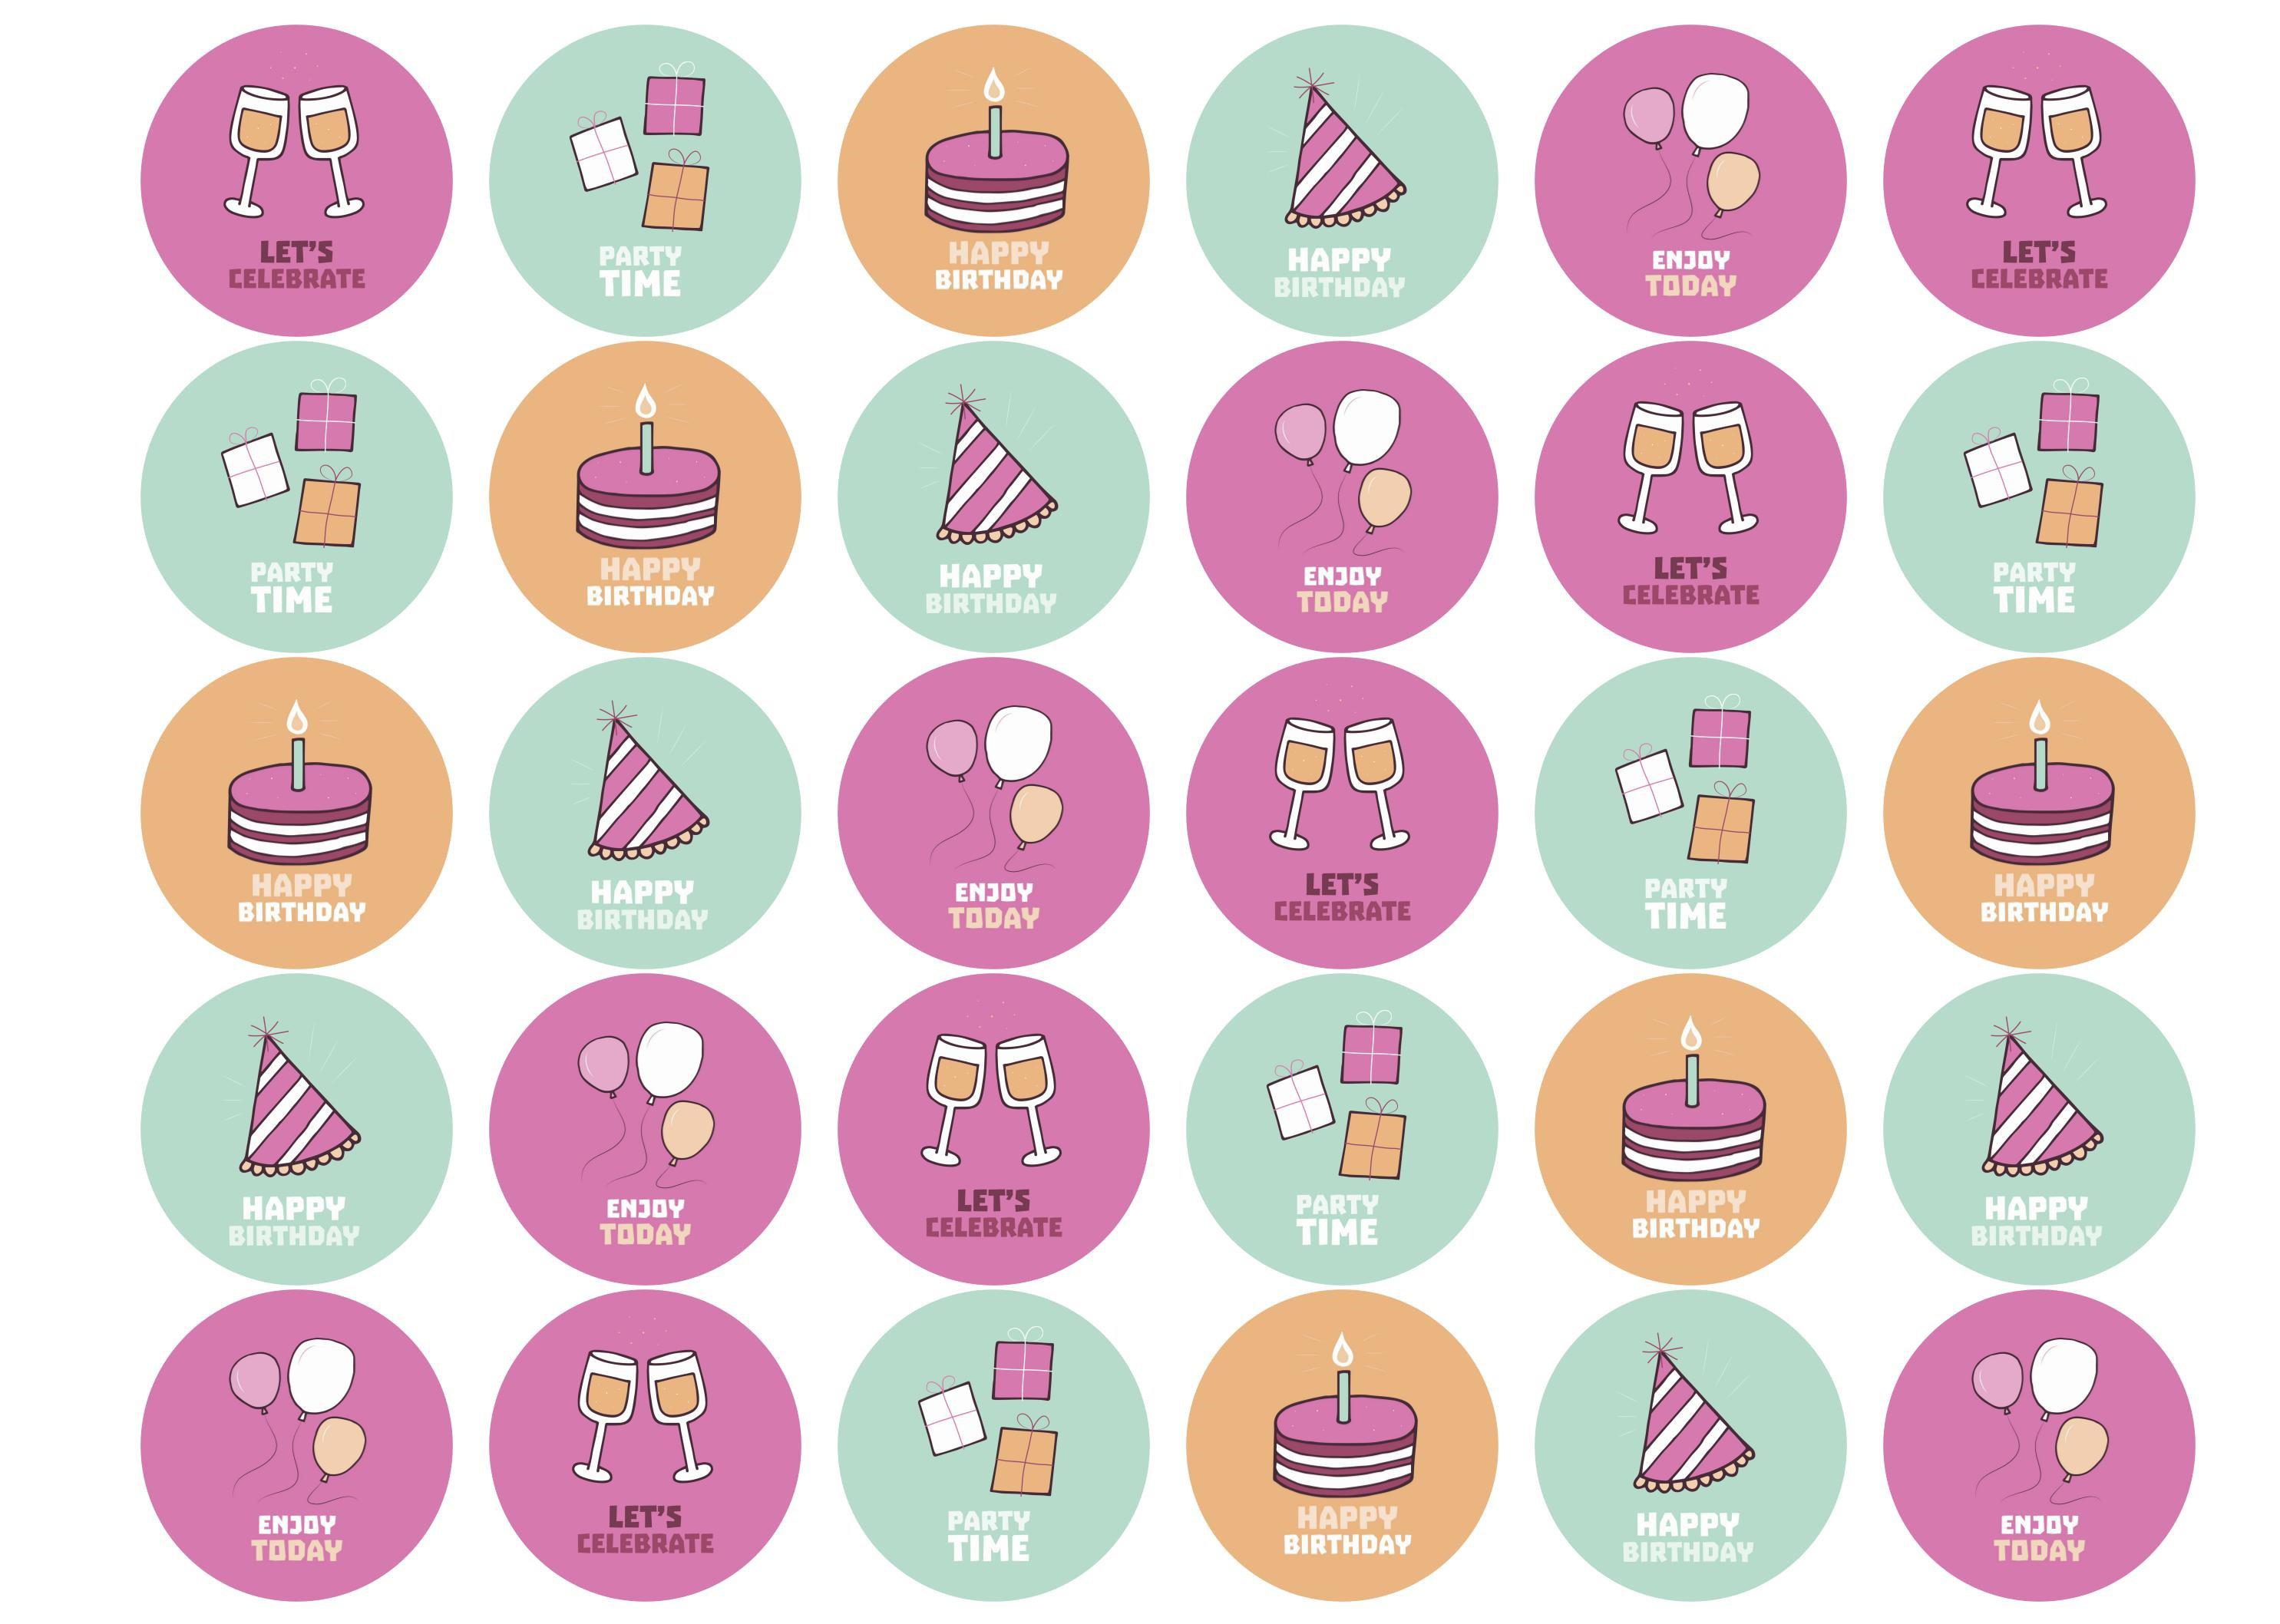 30 edible birthday cupcake toppers with party images